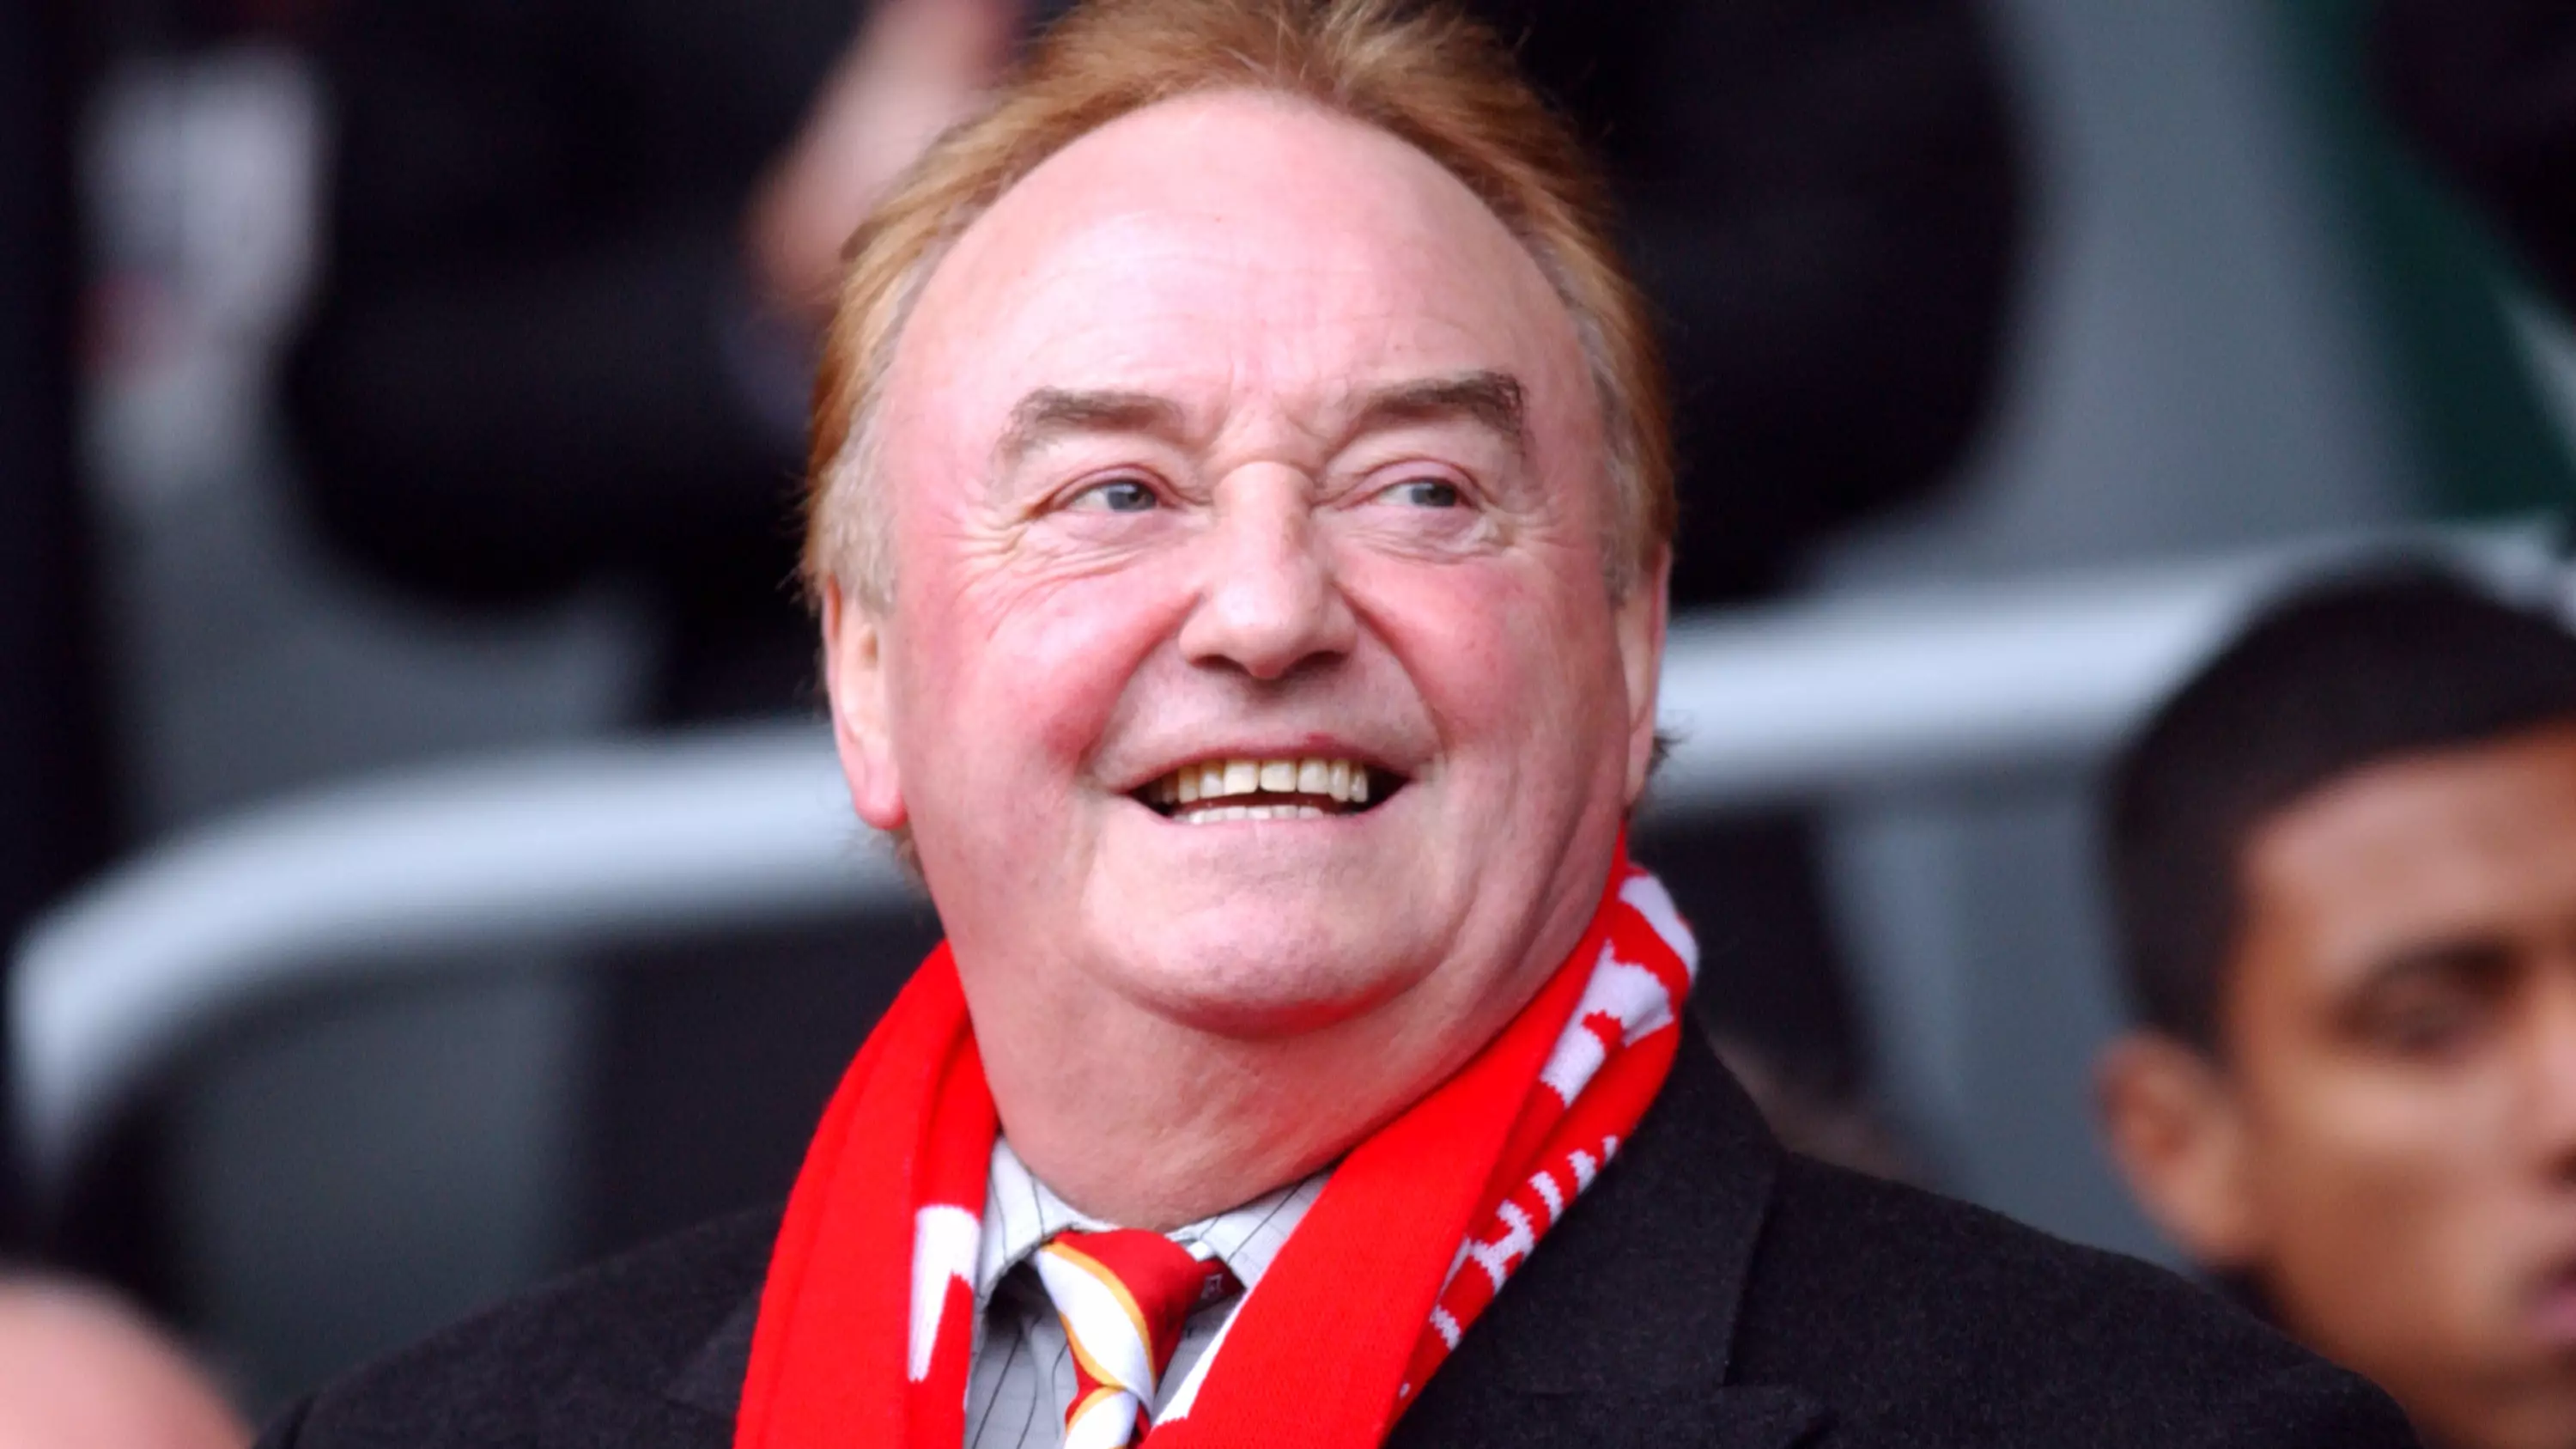 Gerry Marsden From Gerry And The Pacemakers Has Died